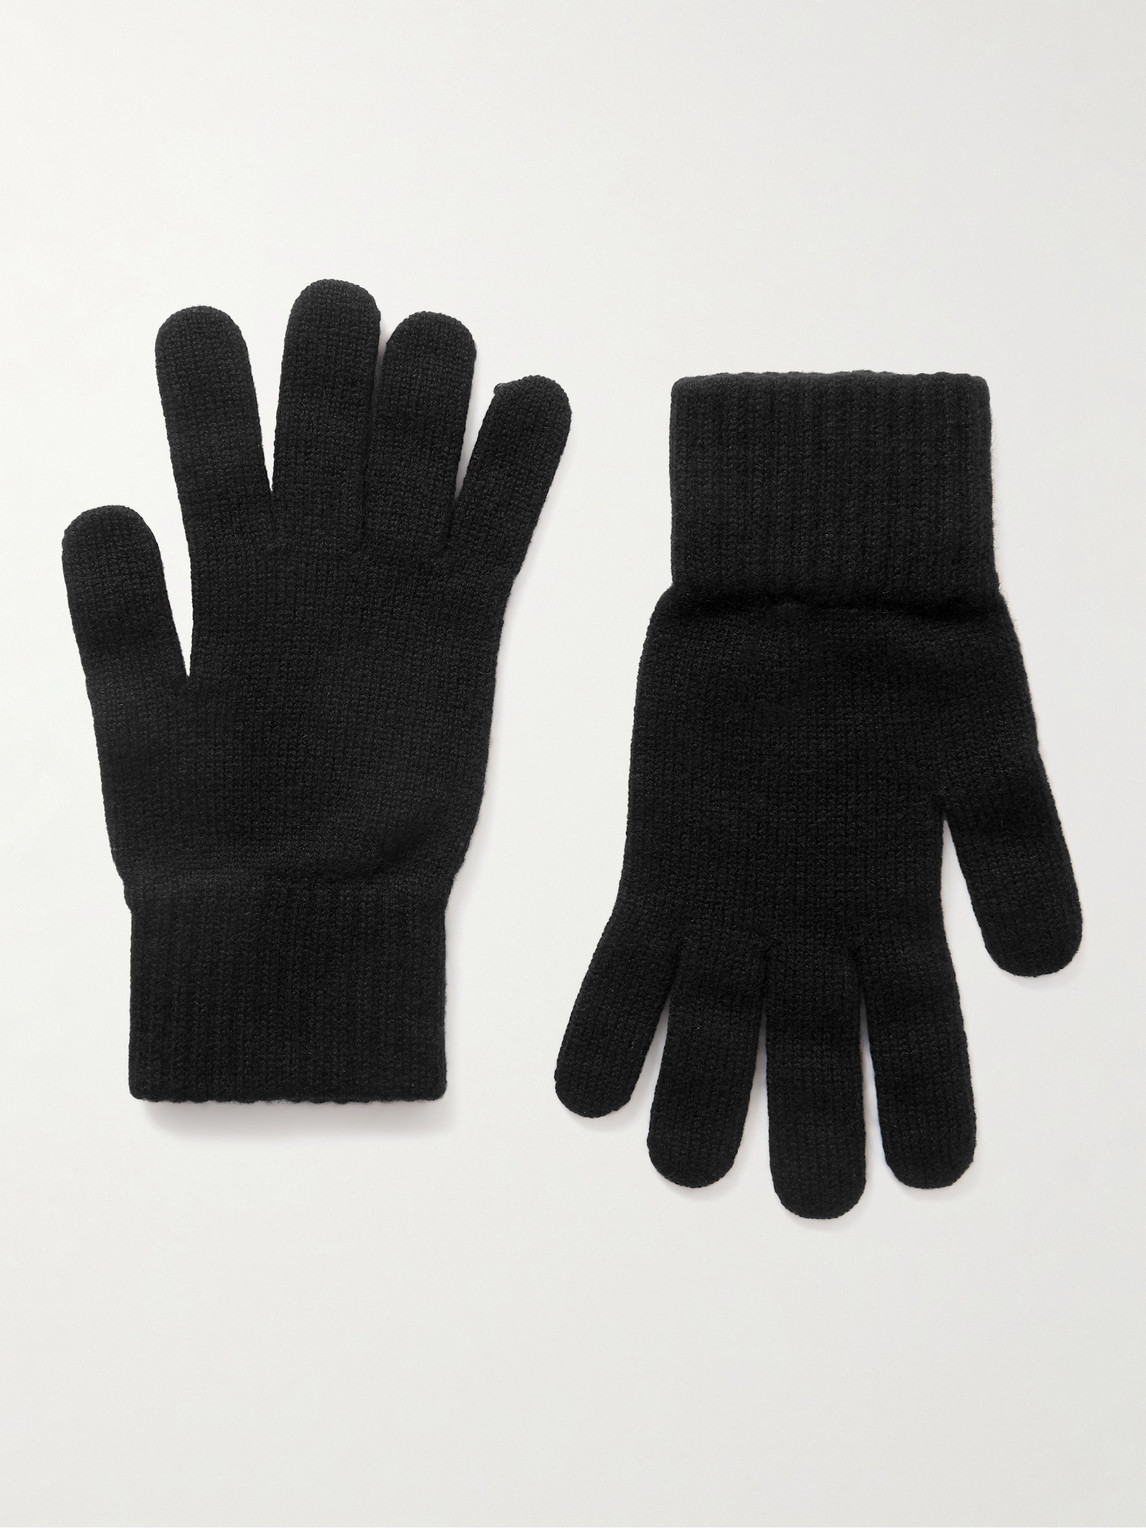 Anderson & Sheppard Cashmere Gloves In Black